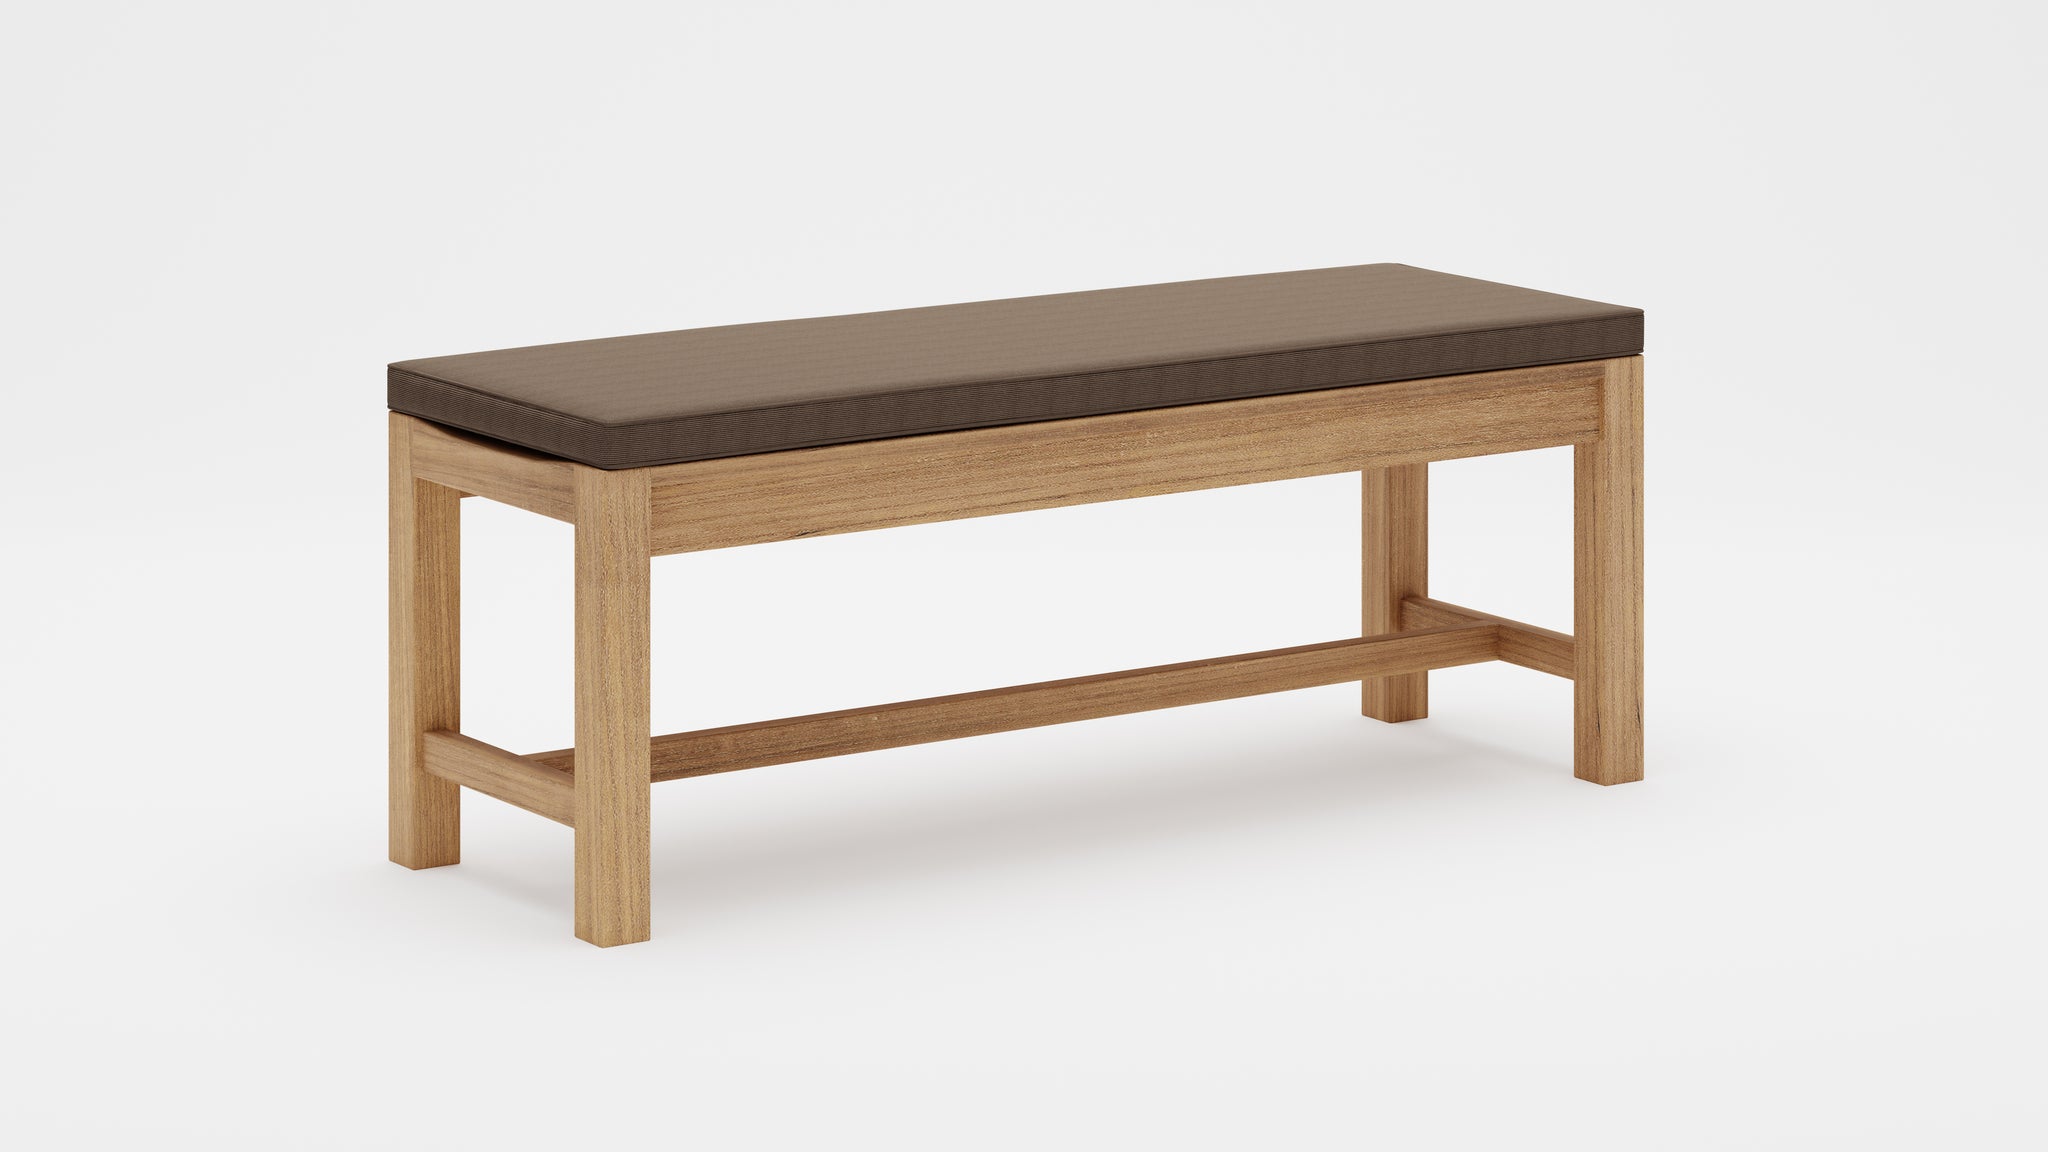 Backless Teak Bench with taupe cushion